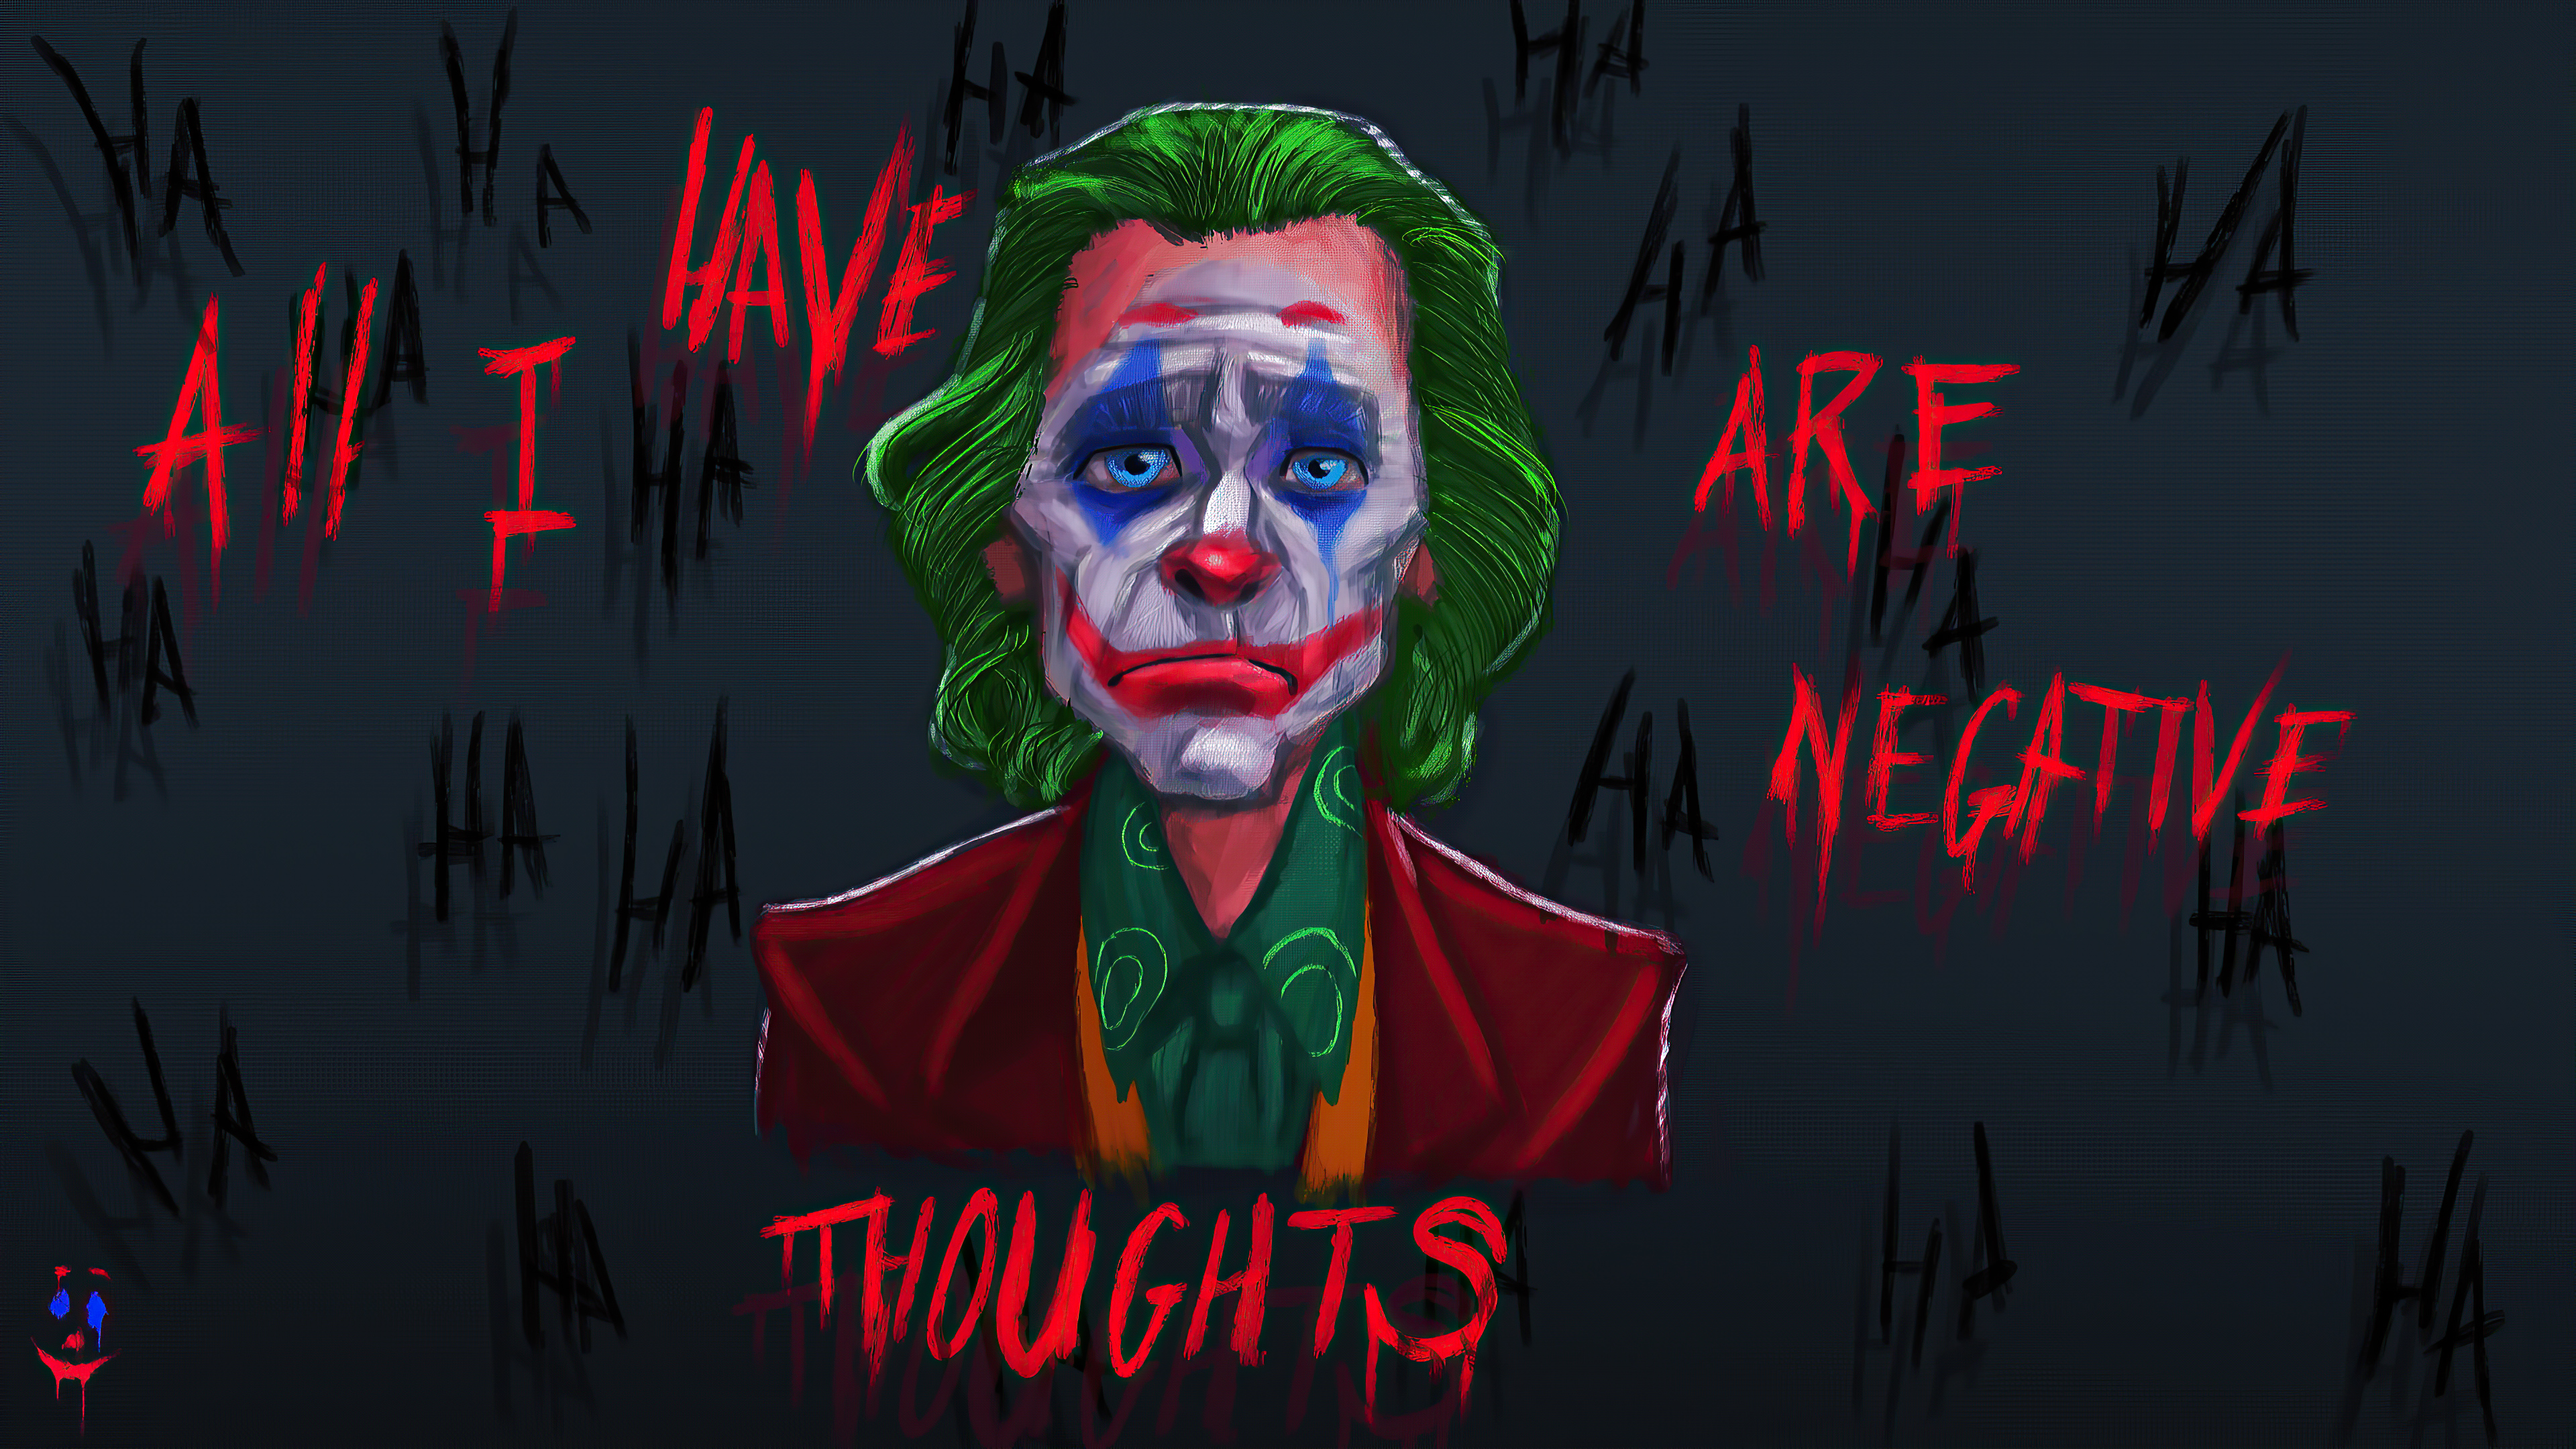 All I Have Negative Thoughts Joker, HD Superheroes, 4k Wallpaper, Image, Background, Photo and Picture